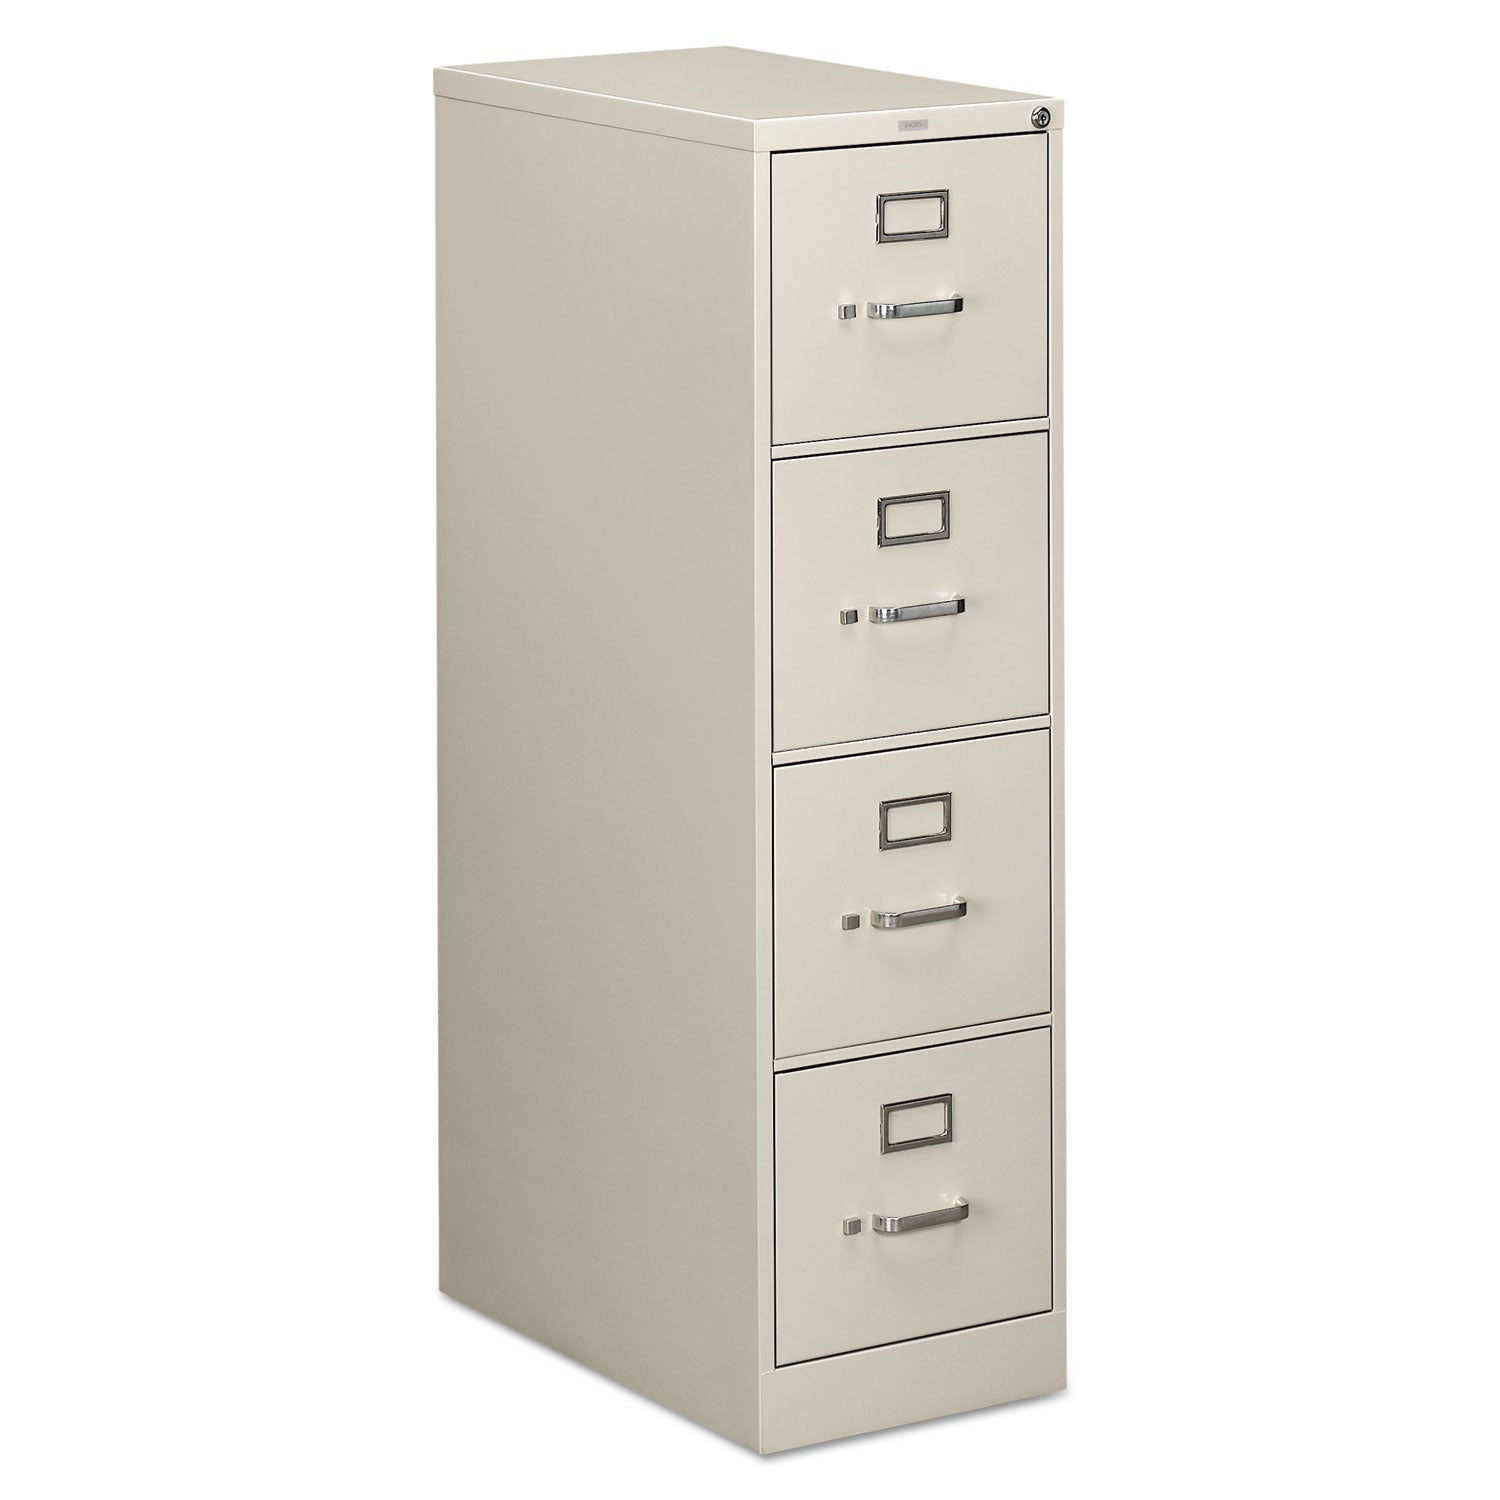 510 Series Vertical File, 4 Letter-Size File Drawers, Light Gray, 15" x 25" x 52 - 